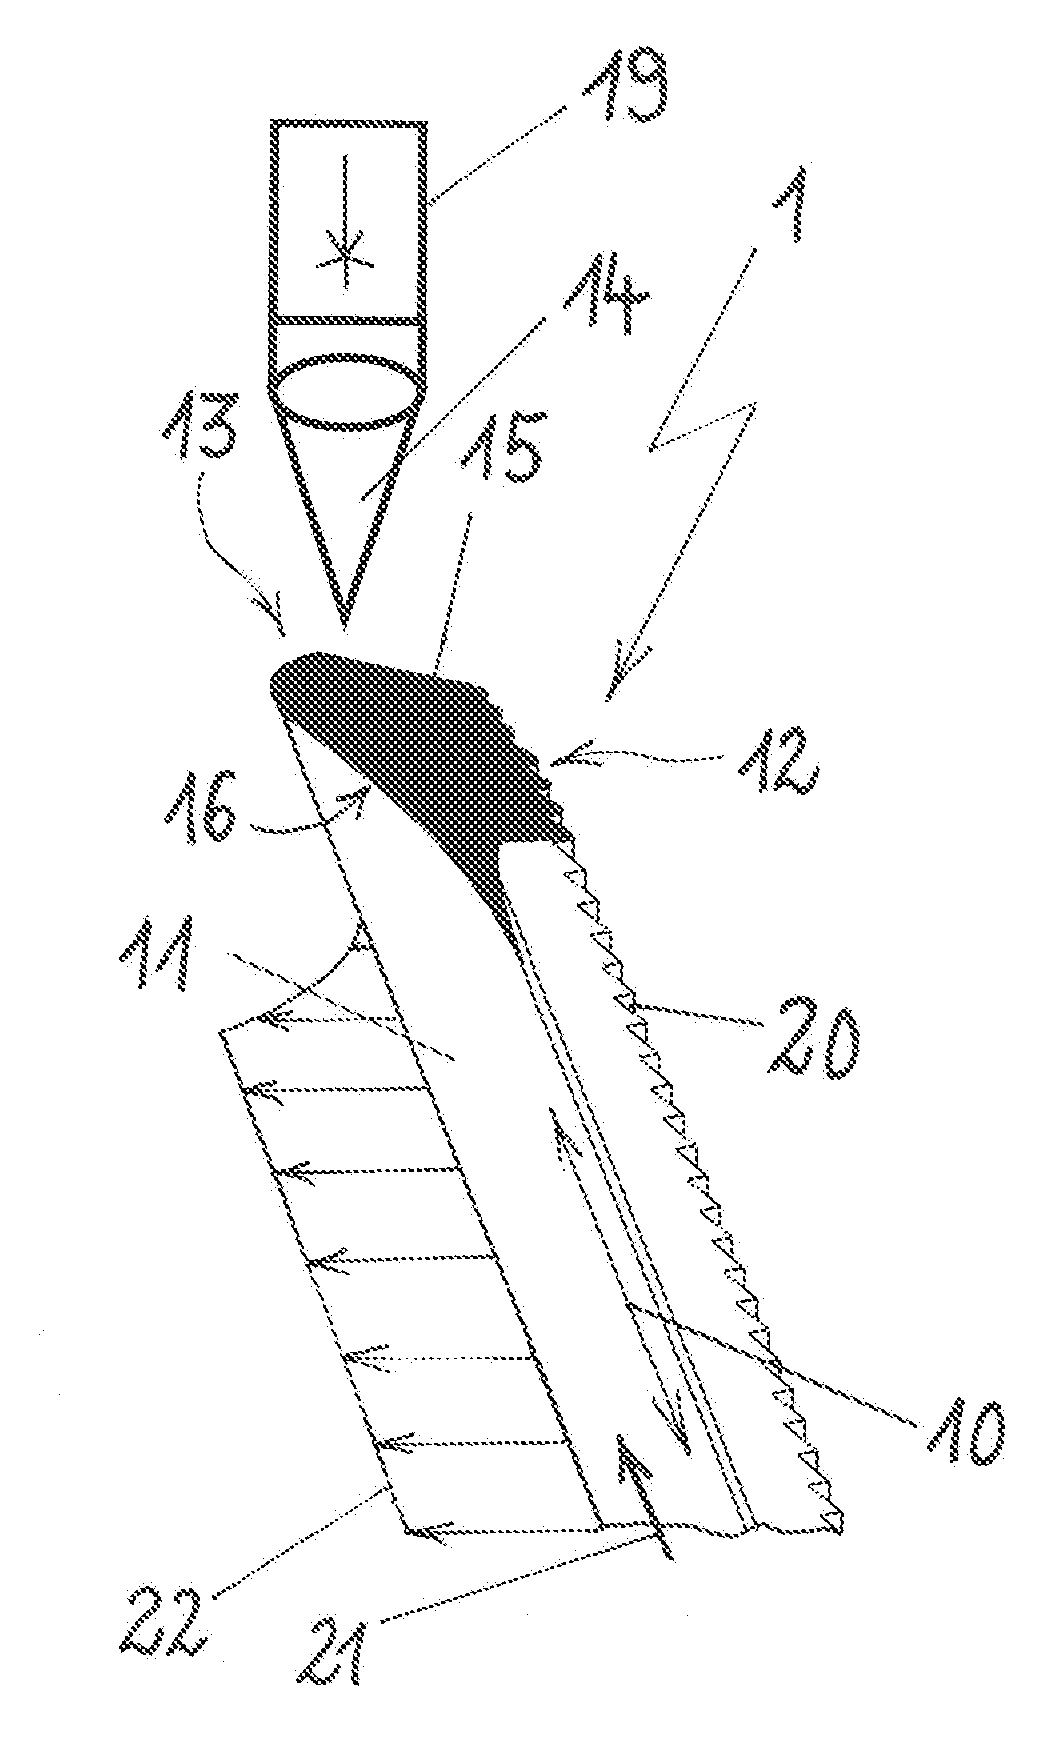 Light guide for a lighting device